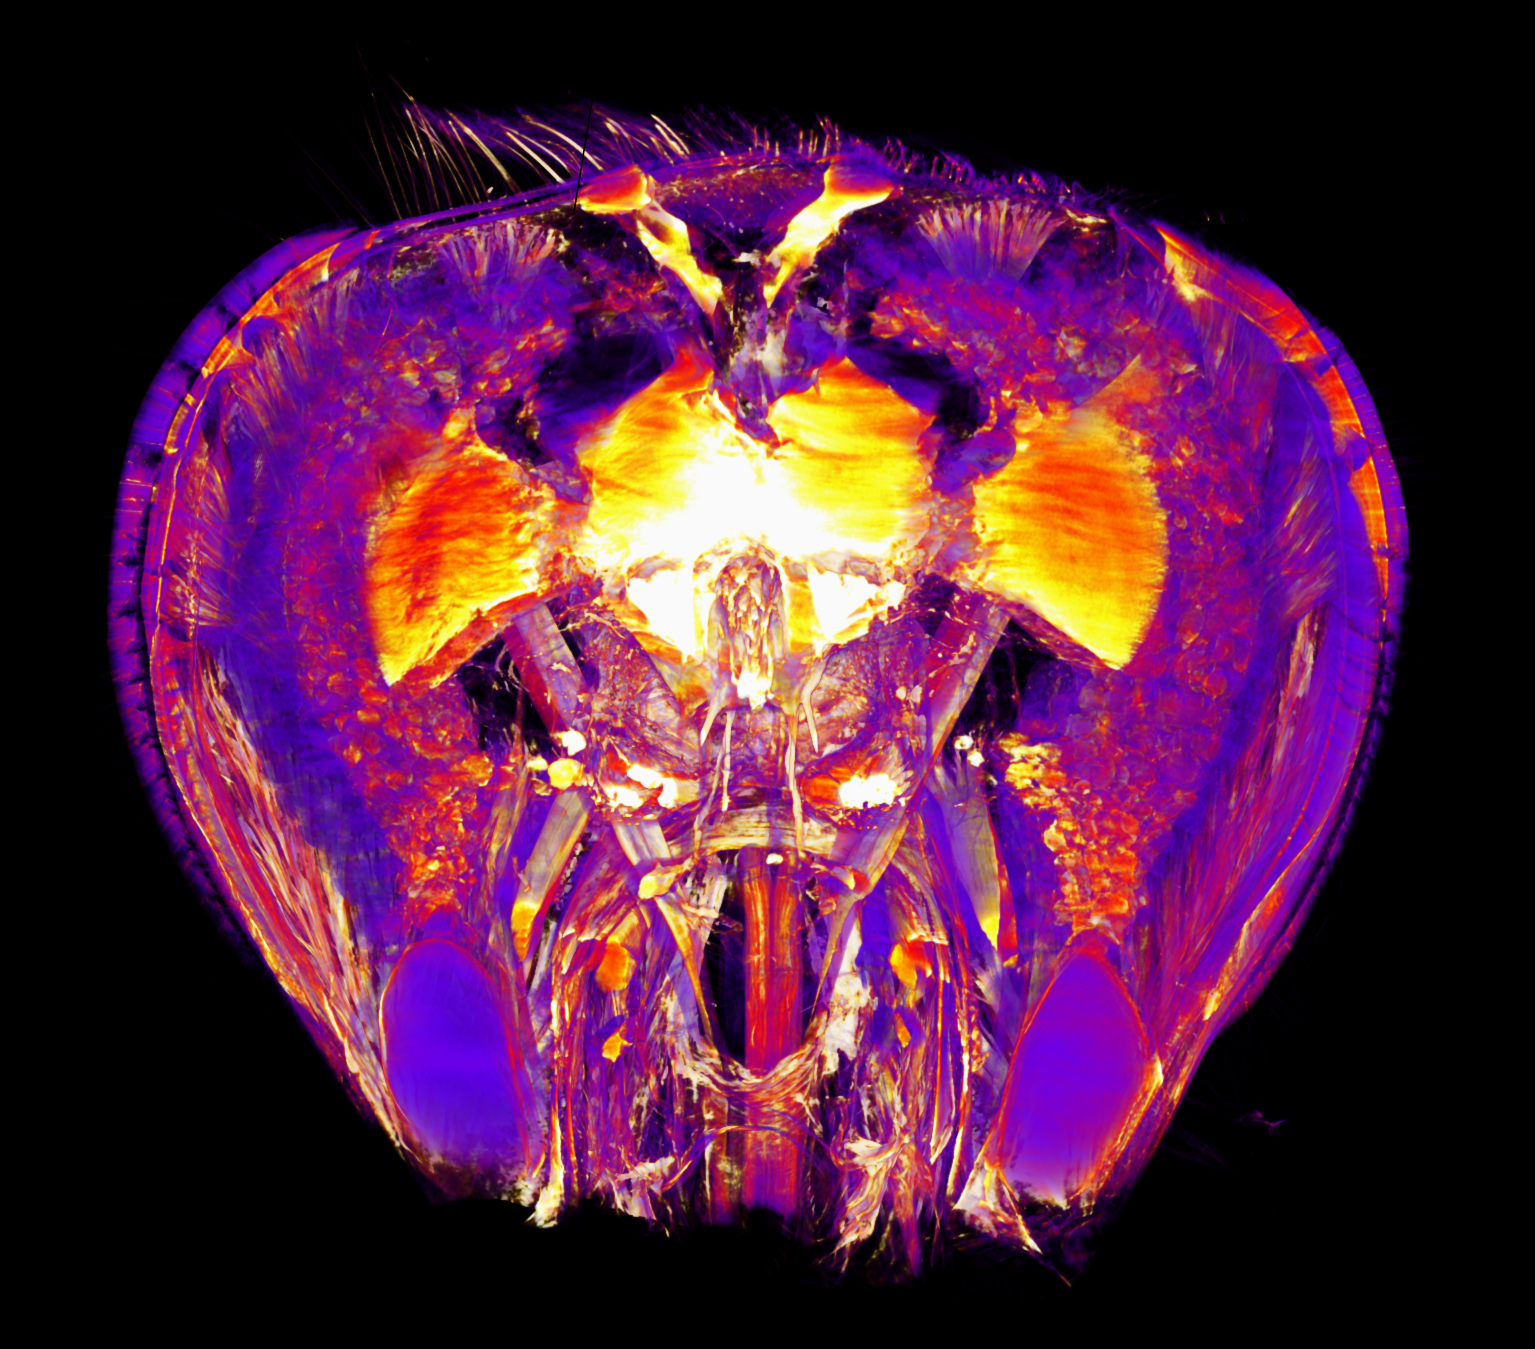 3D reconstruction of Osmium-stained dissected head of worker bee. 